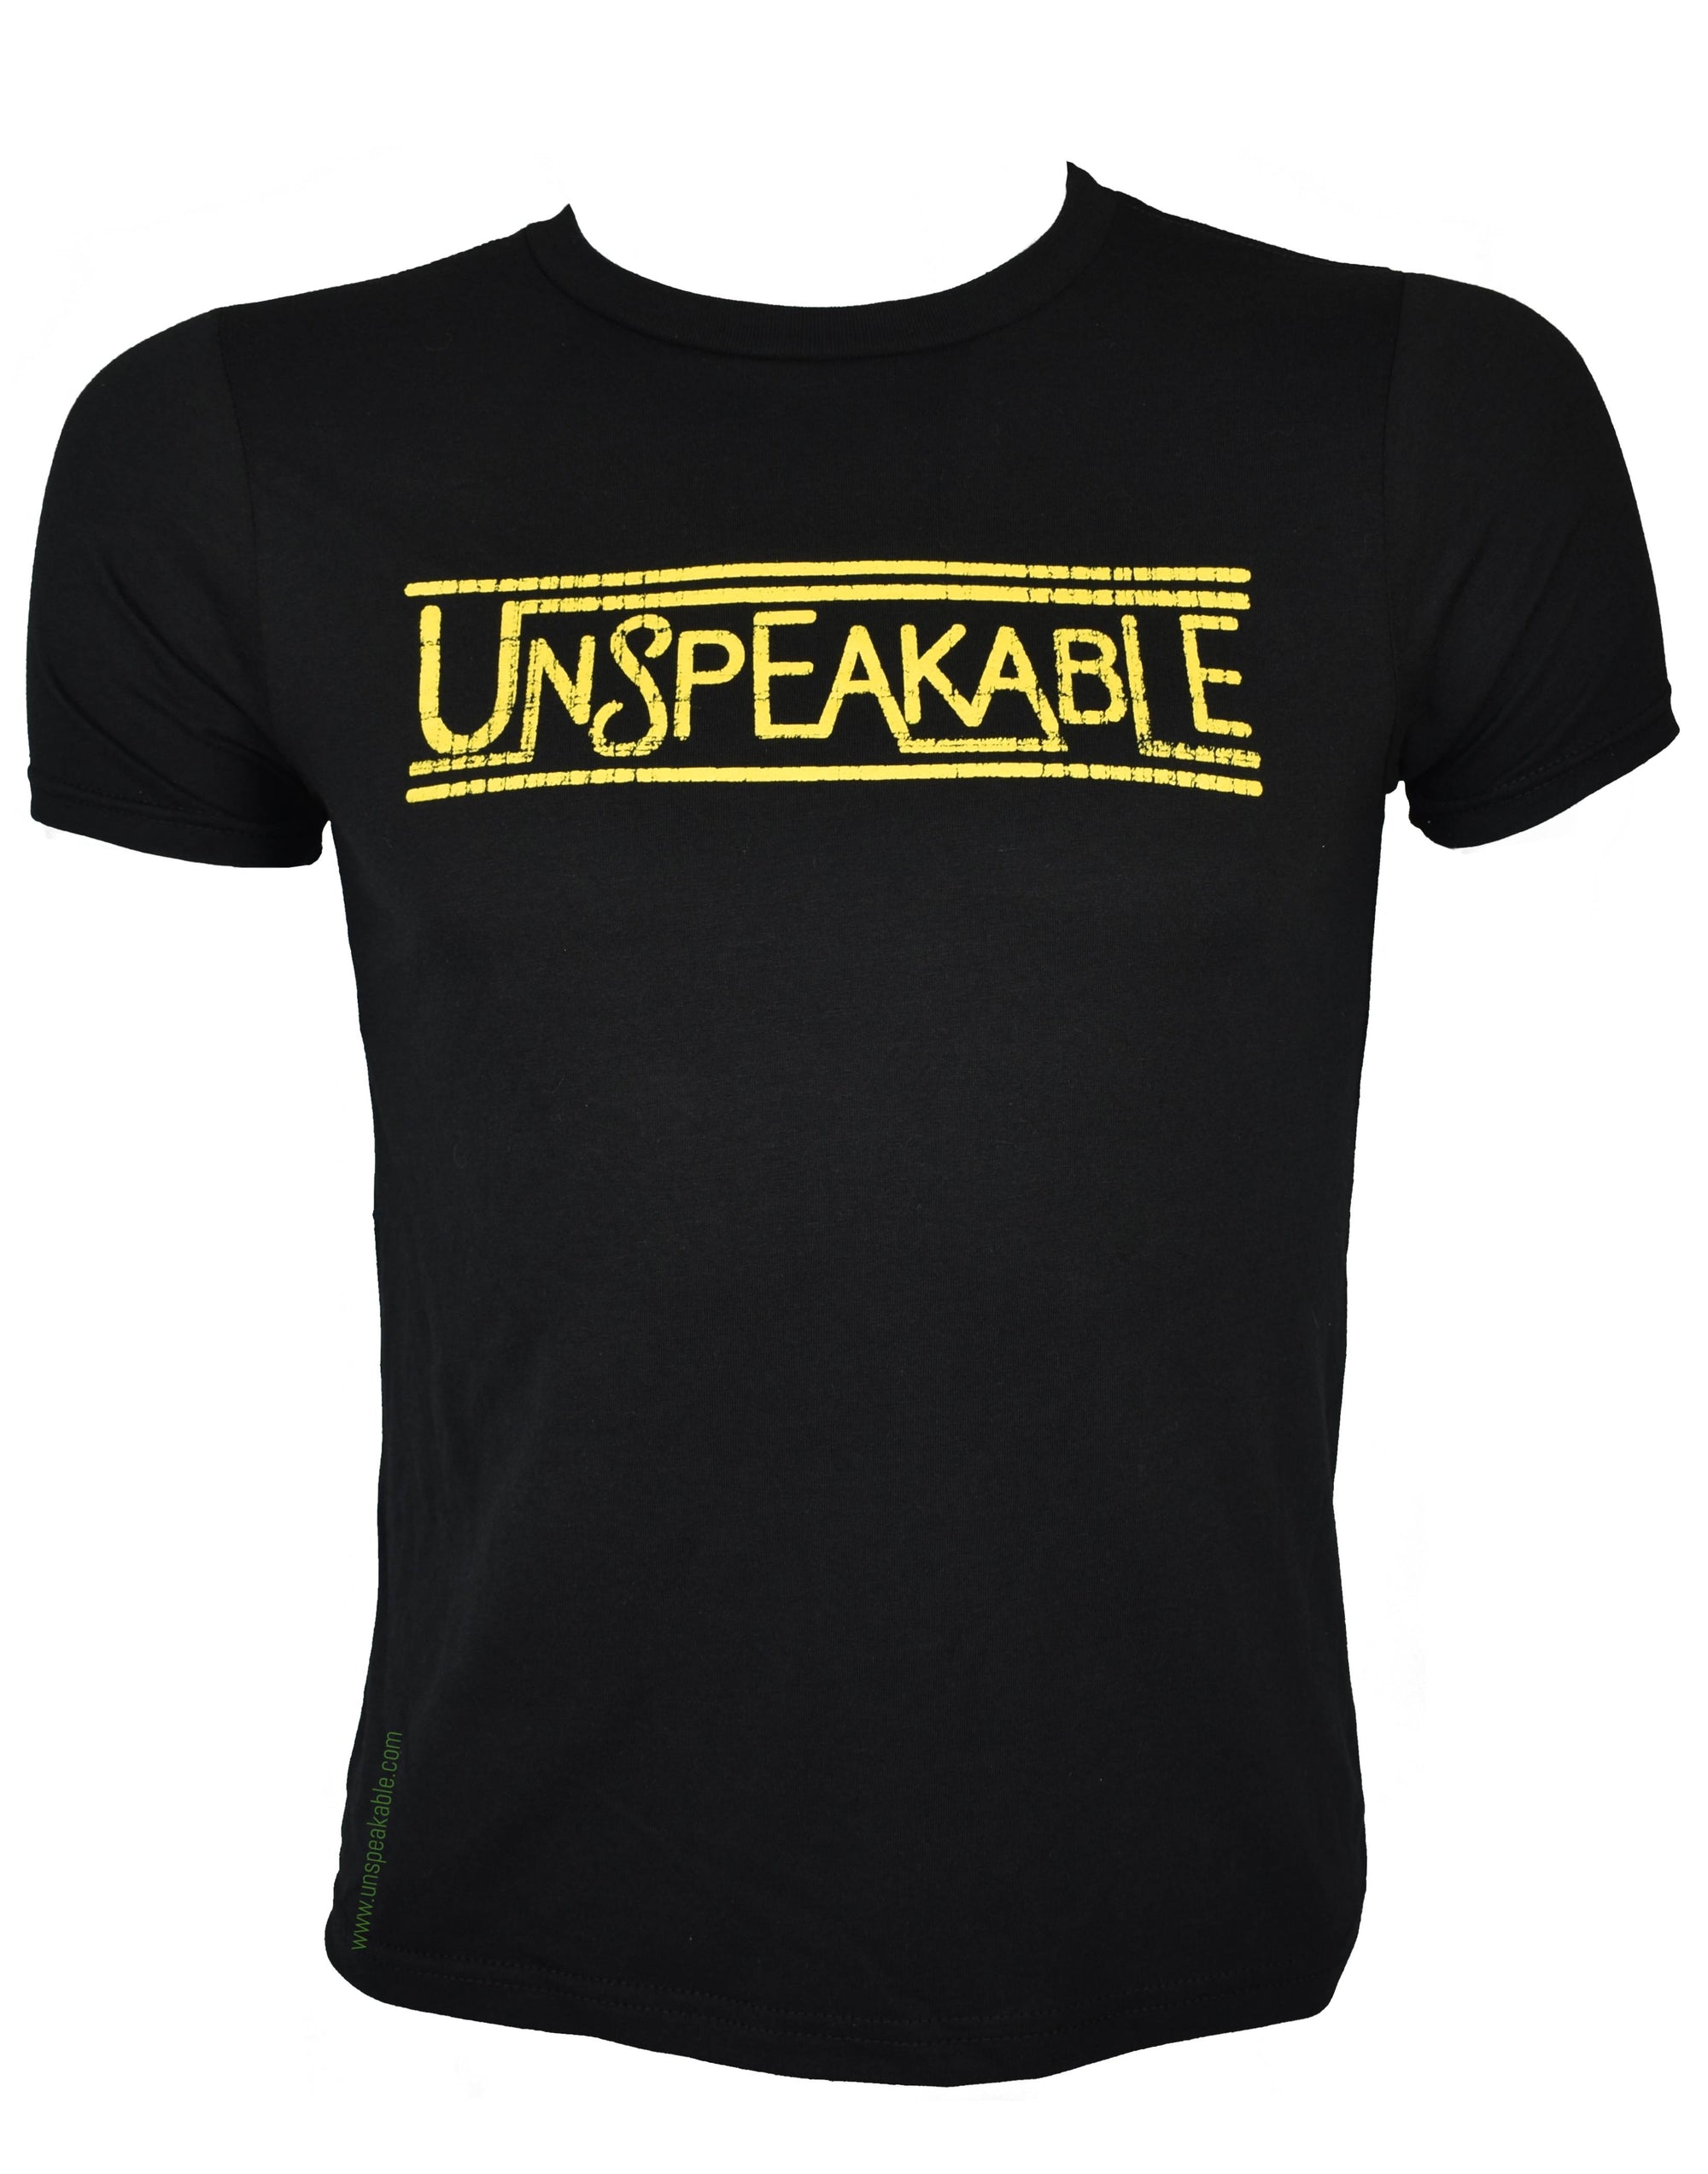 BLACK T-SHIRT WITH YELLOW FONT - UnspeakableGaming